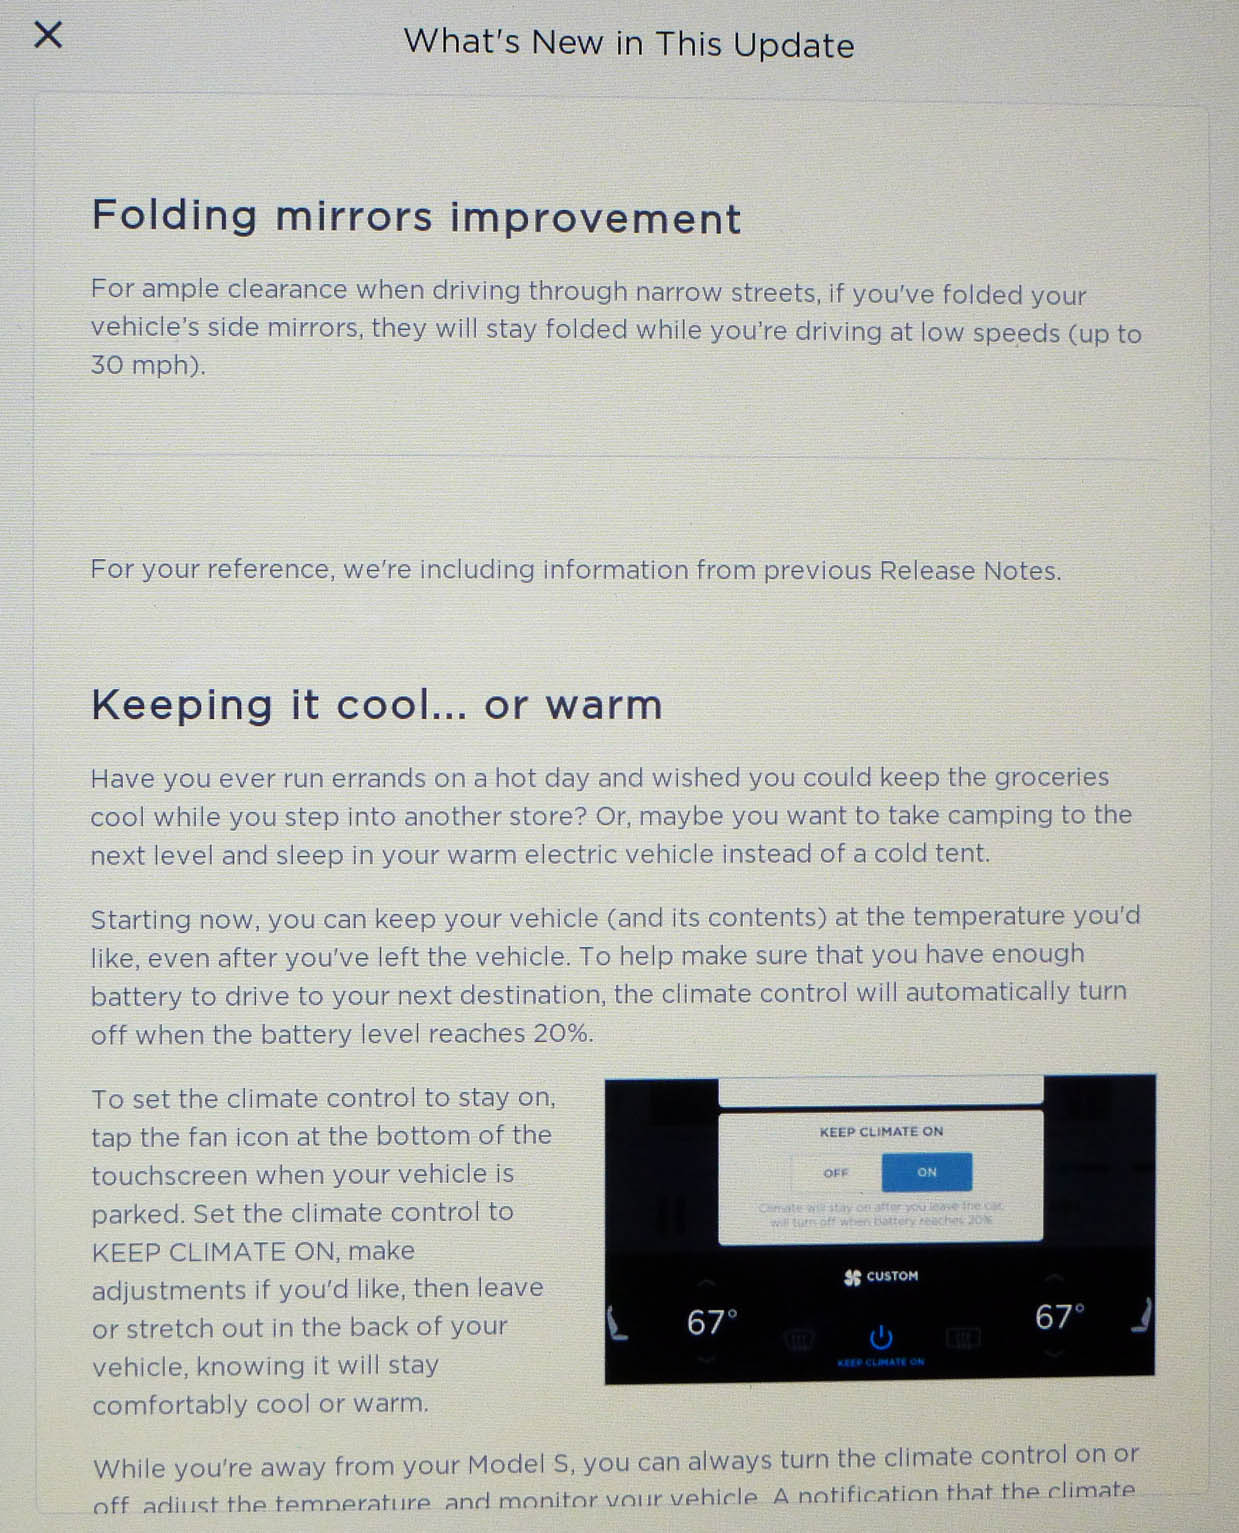 Tesla release notes 2017.42 page1 1970sf 10-28-17.jpg